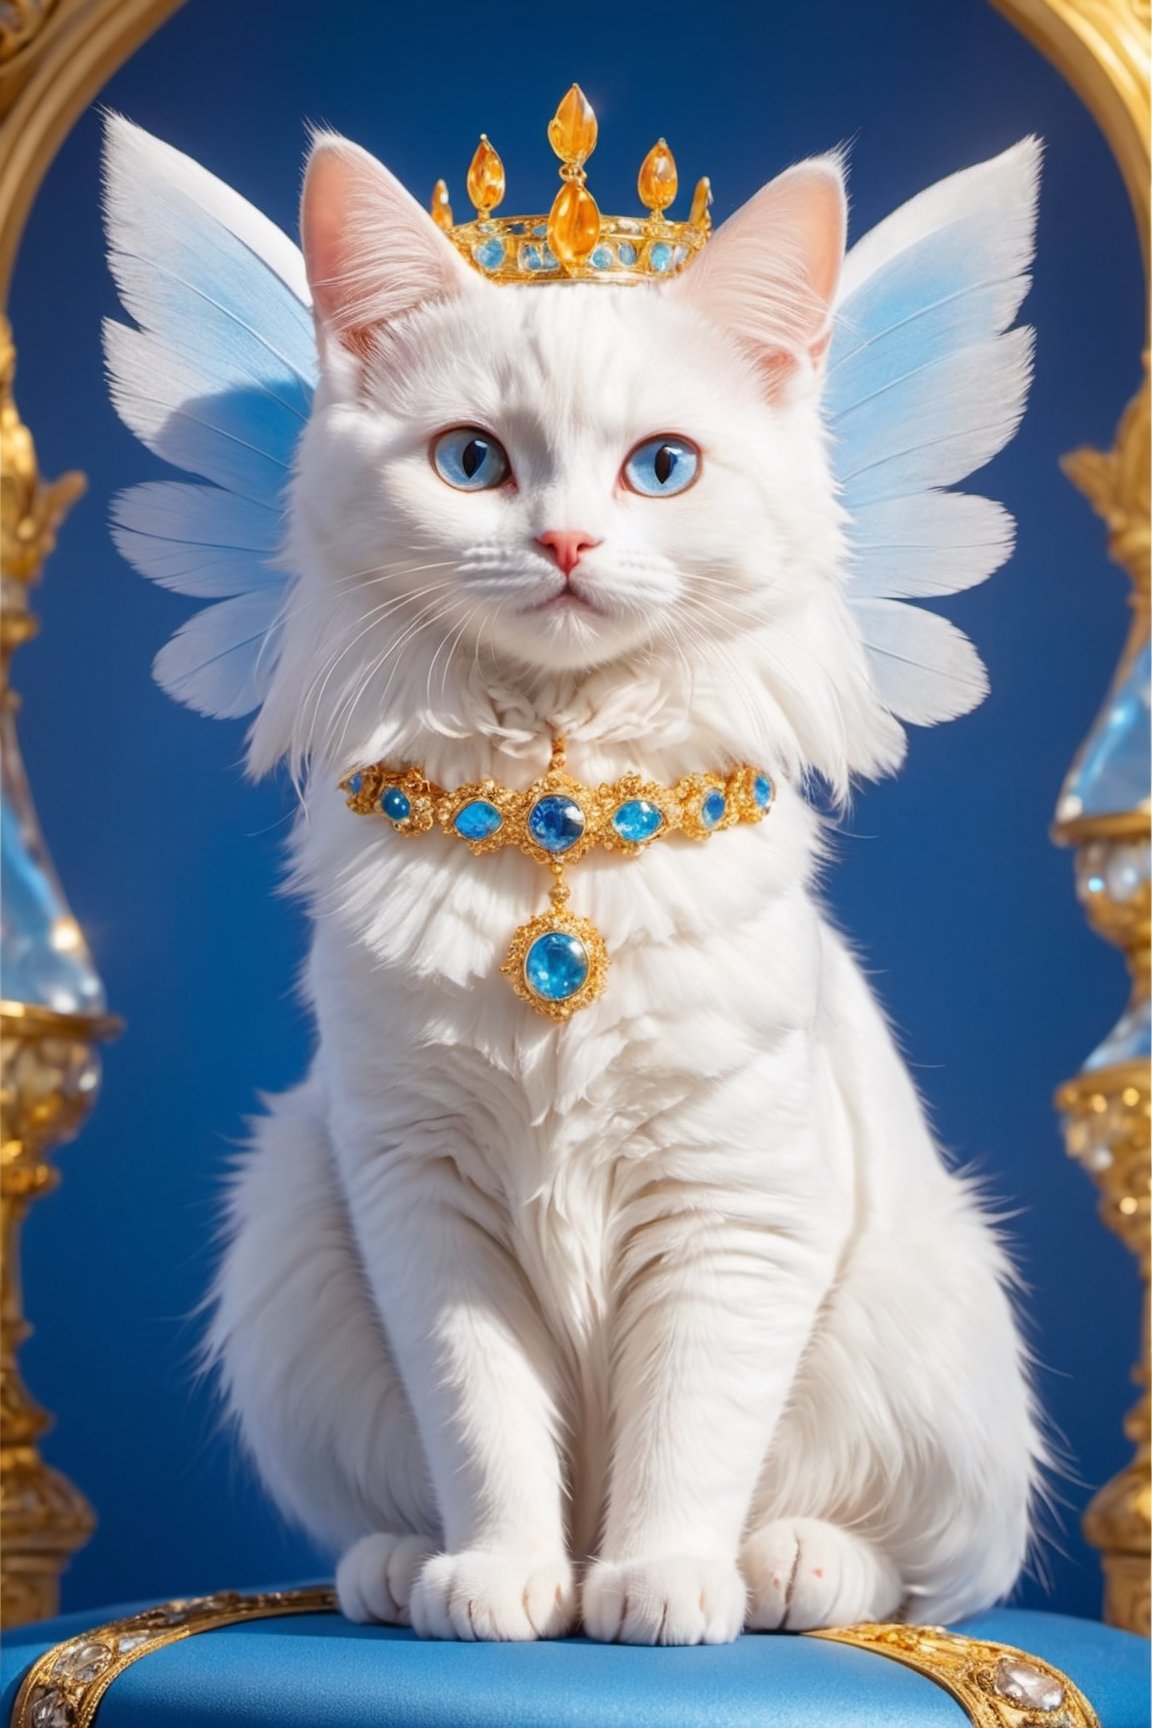 Angelic cat, mystirious aura, She is the Angel of cat, crown, siting on the throne, licking its paws, cute look